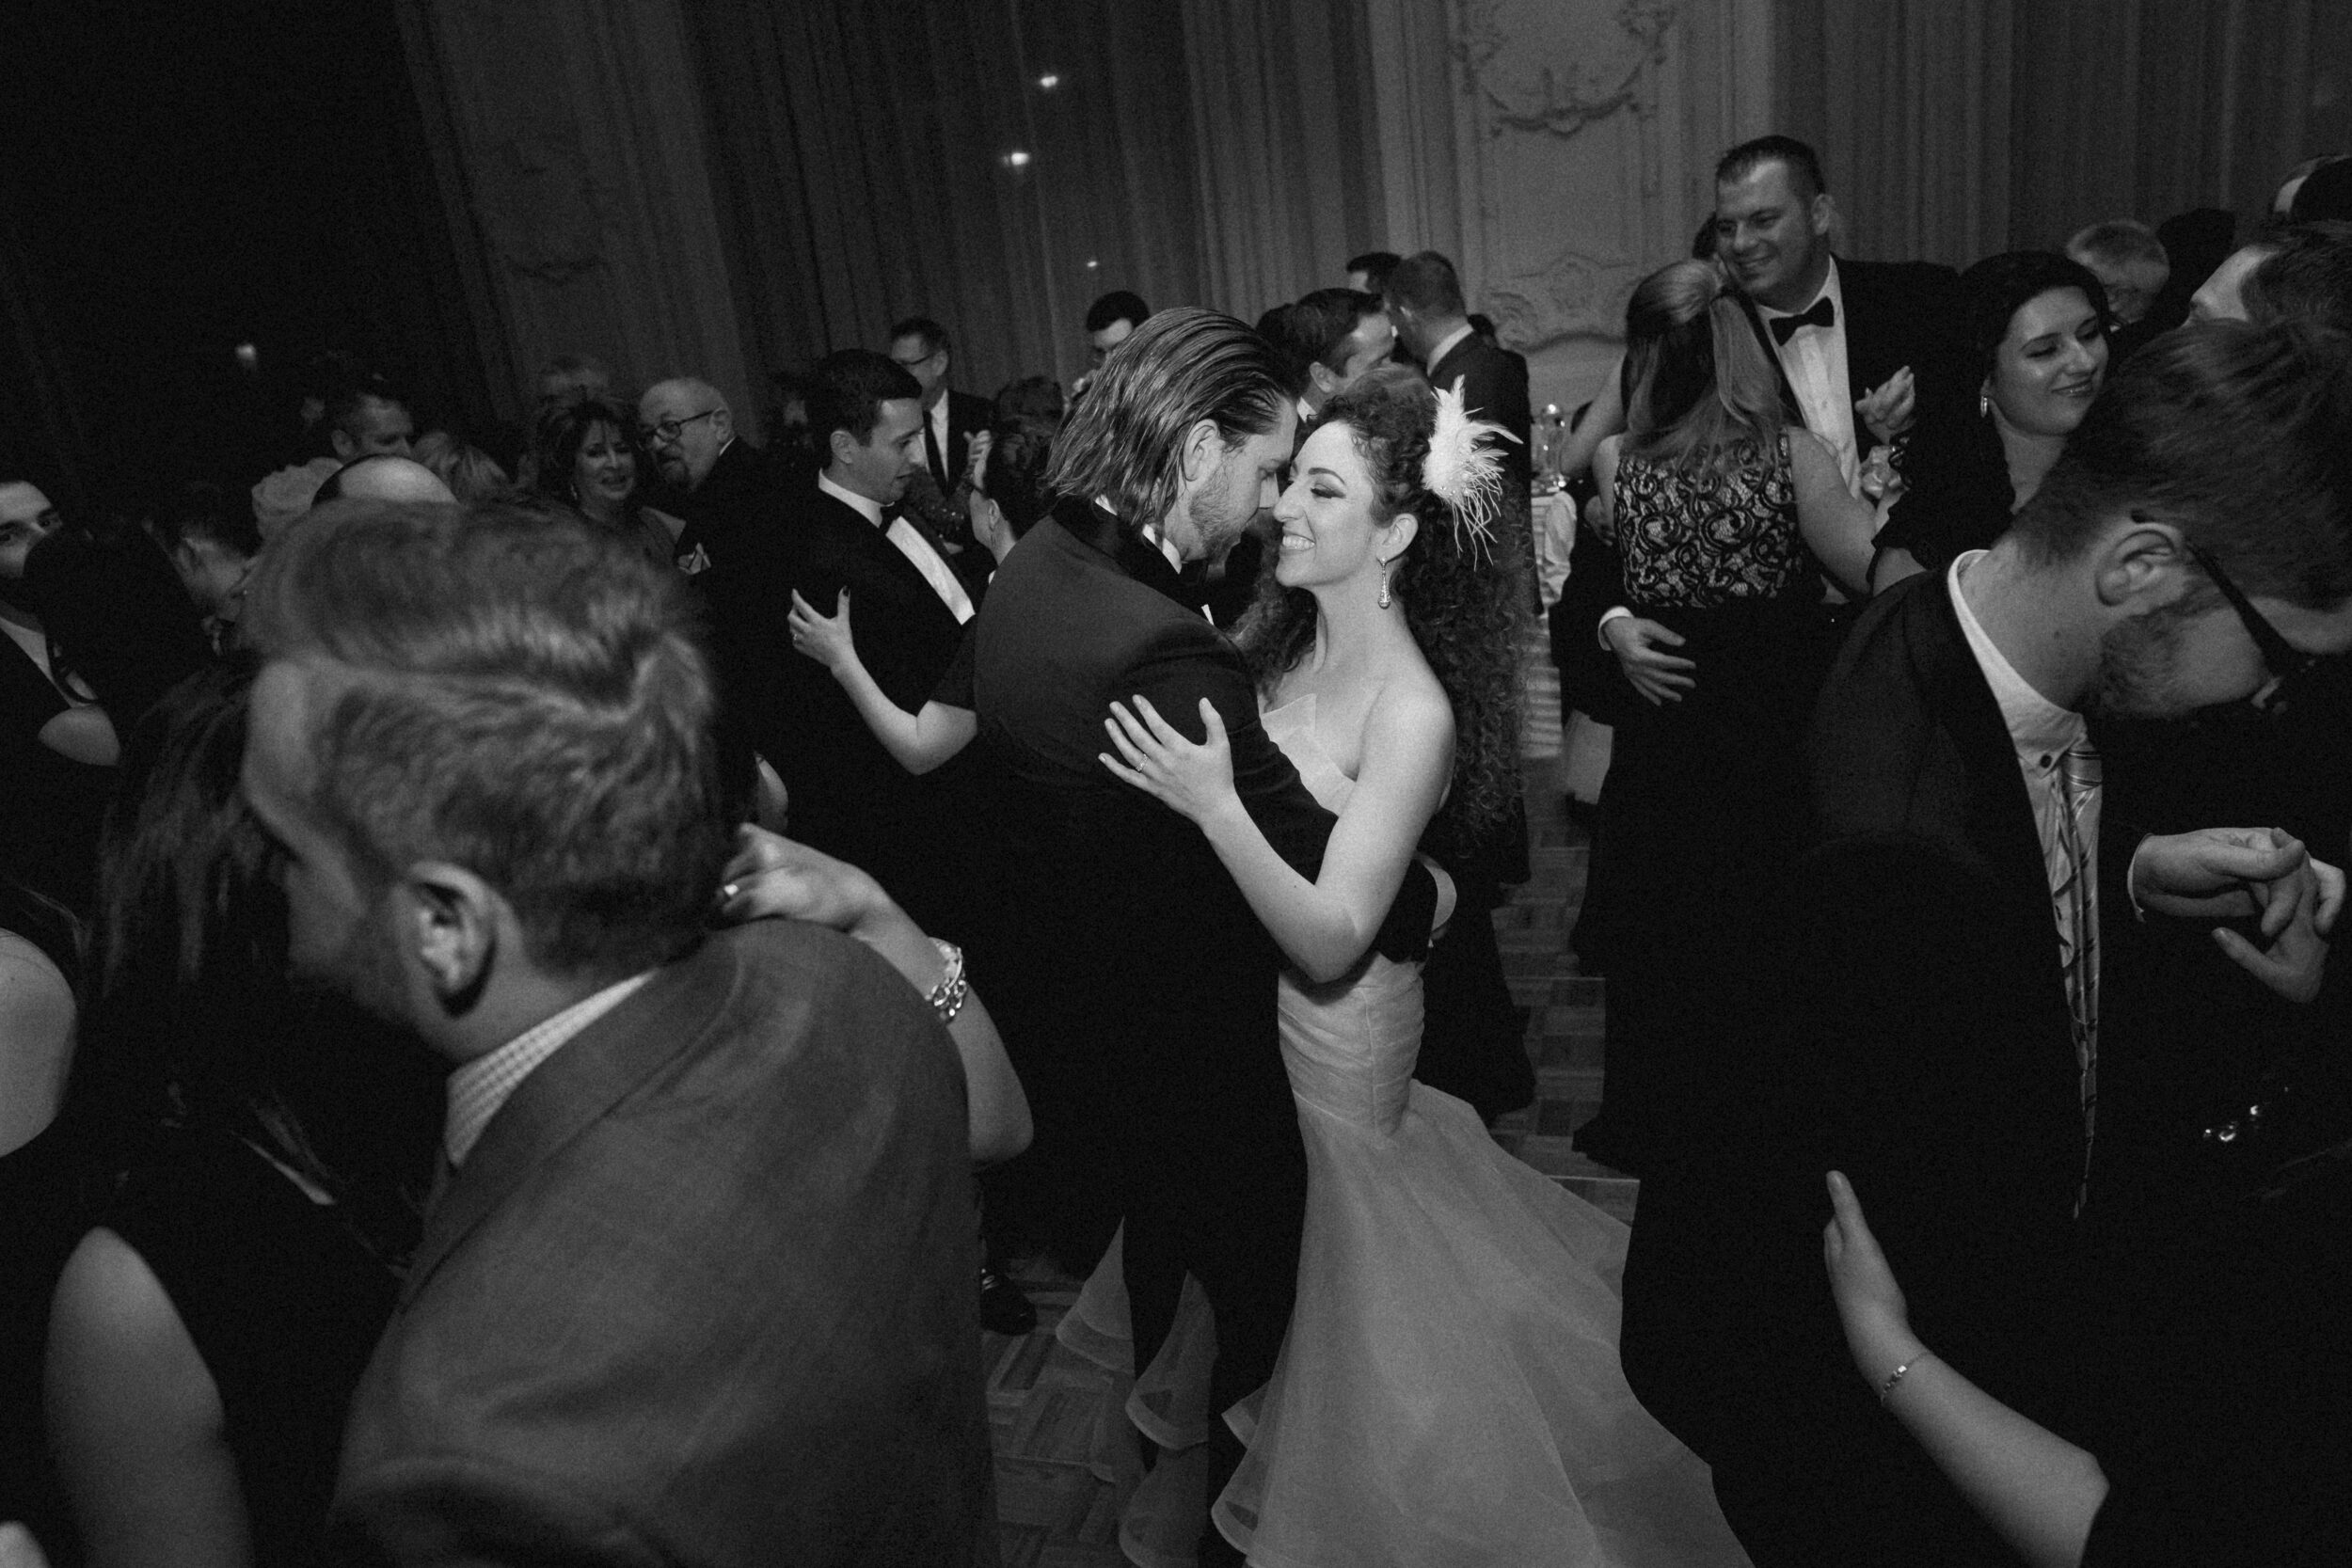 A newly married couple dances with one another at their reception in Toronto.